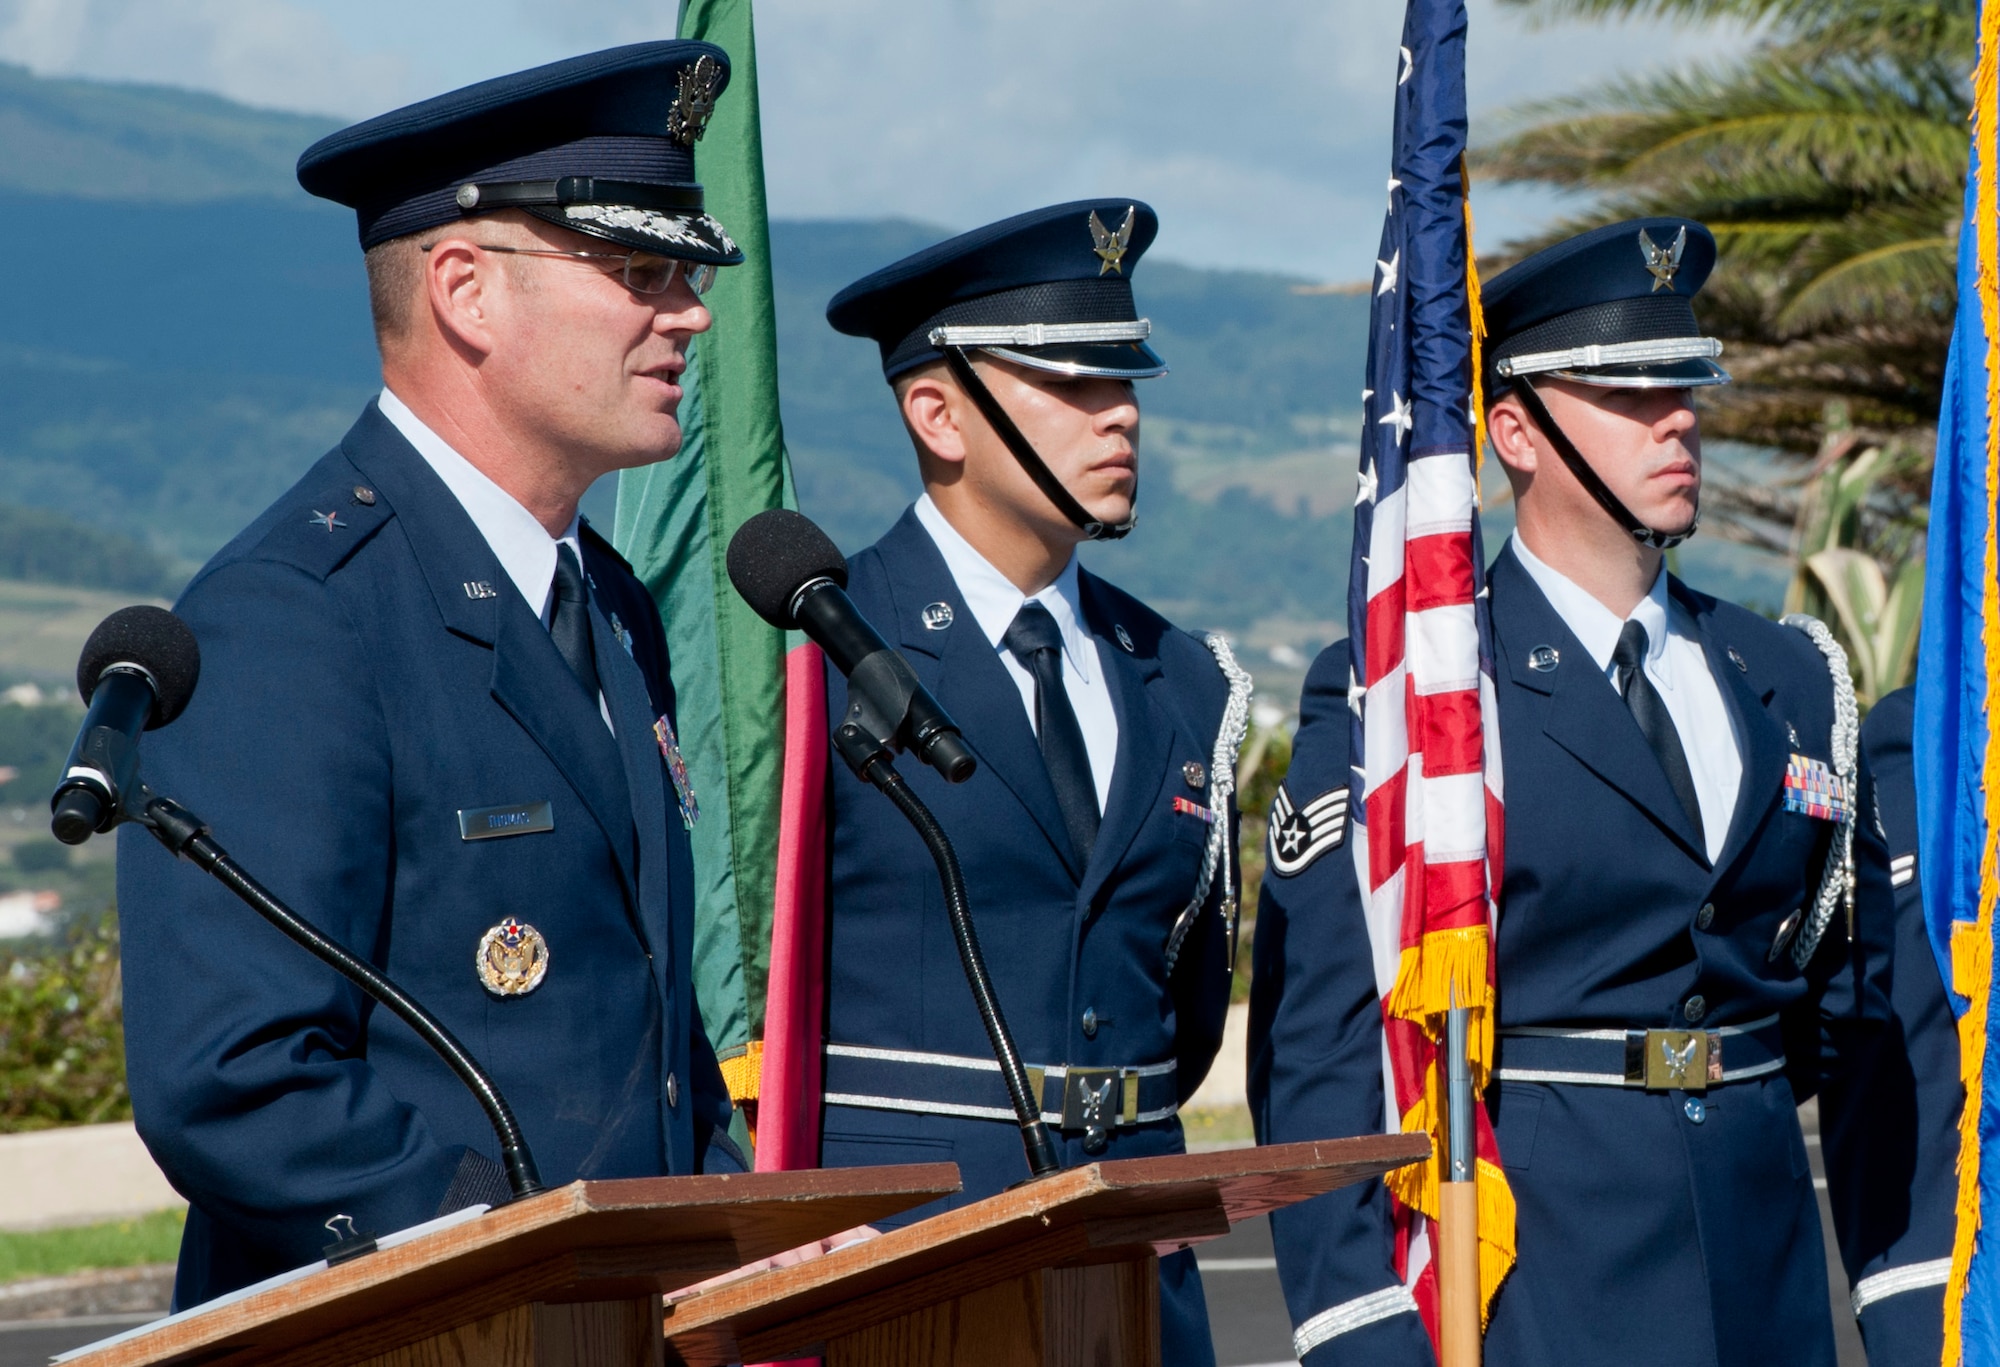 Brig. Gen. Jon Thomas, commander of the 86th Airlift Wing, Ramstein Air Base, Germany, speaks to members of the new 65th Air Base Group and Portuguese community during a Redesignation Ceremony at Lajes Field, Azores, Portugal, August 14, 2015. With this Redesignation Ceremony, the 65th Air Base Group is now aligned under the 86th Airlift Wing and remains positioned to provide agile combat support and services to aircraft and aircrews. (U.S. Air Force photo by Master Sgt. Bradley C. Church)